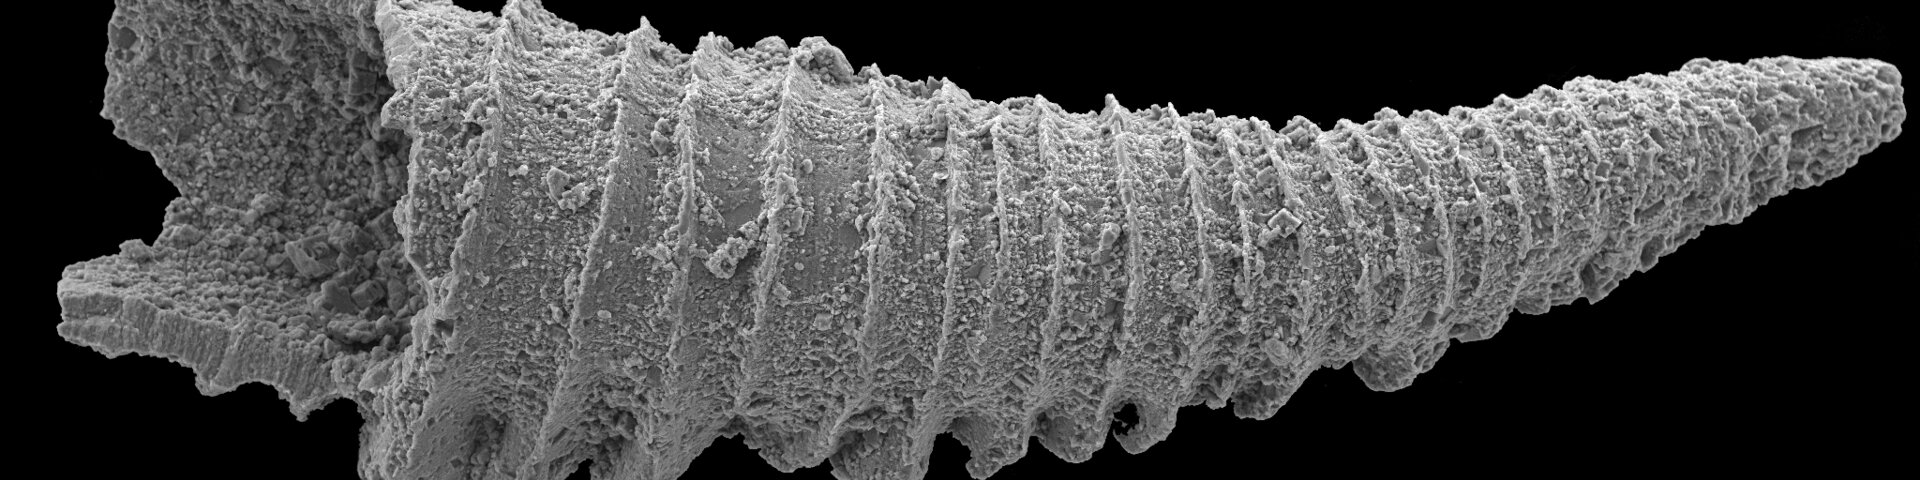 New species from proto-Baltic Sea 450 million years ago